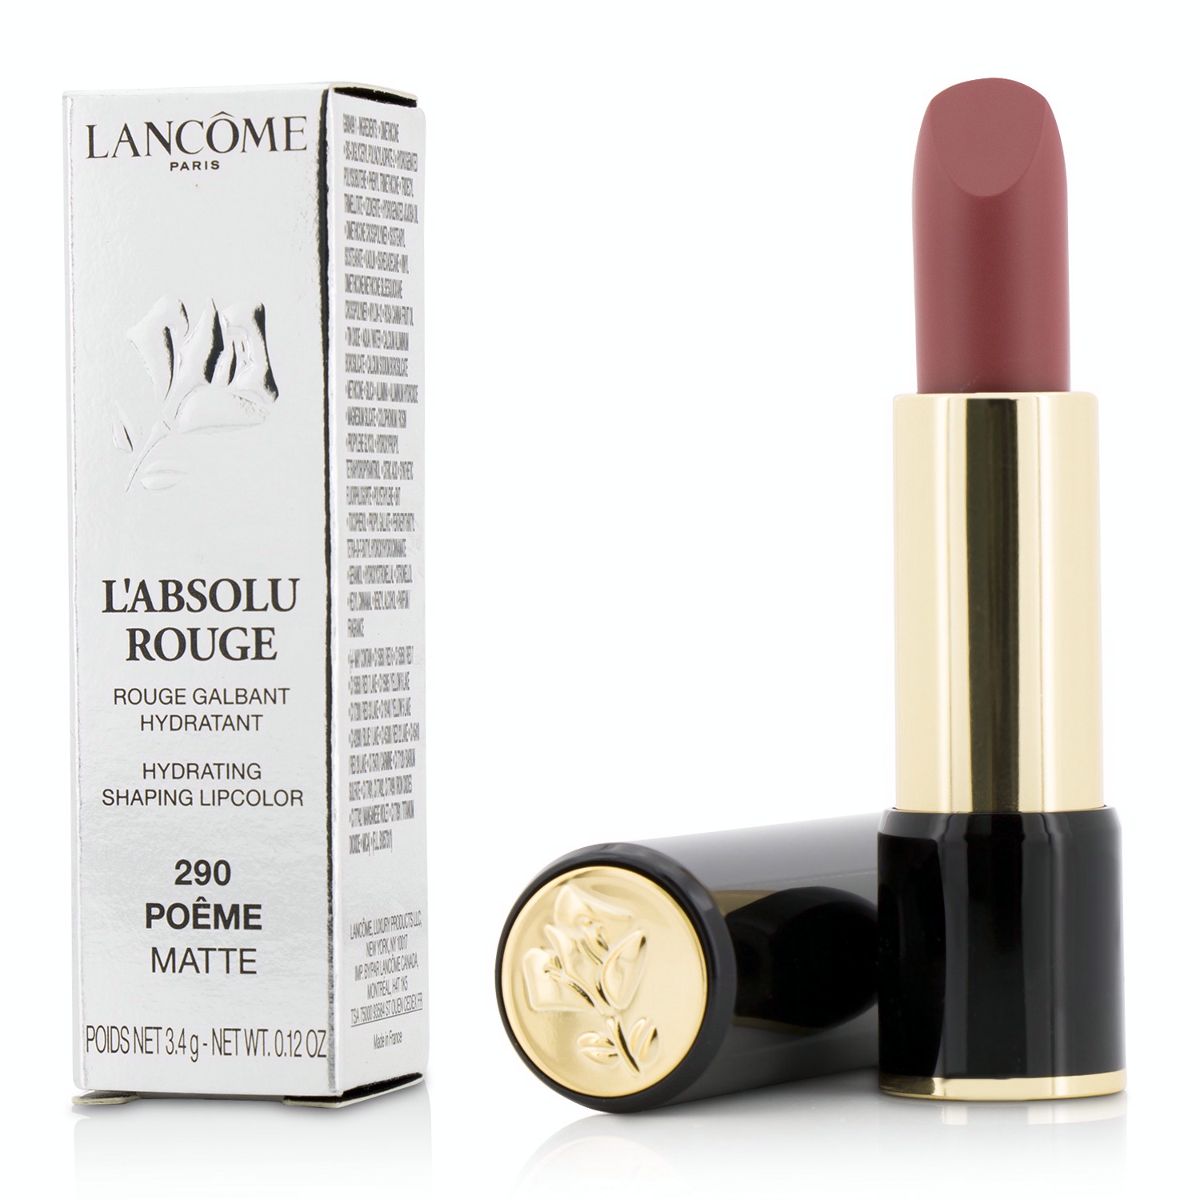 L Absolu Rouge Hydrating Shaping Lipcolor - # 290 Poeme (Matte) Lancome Image